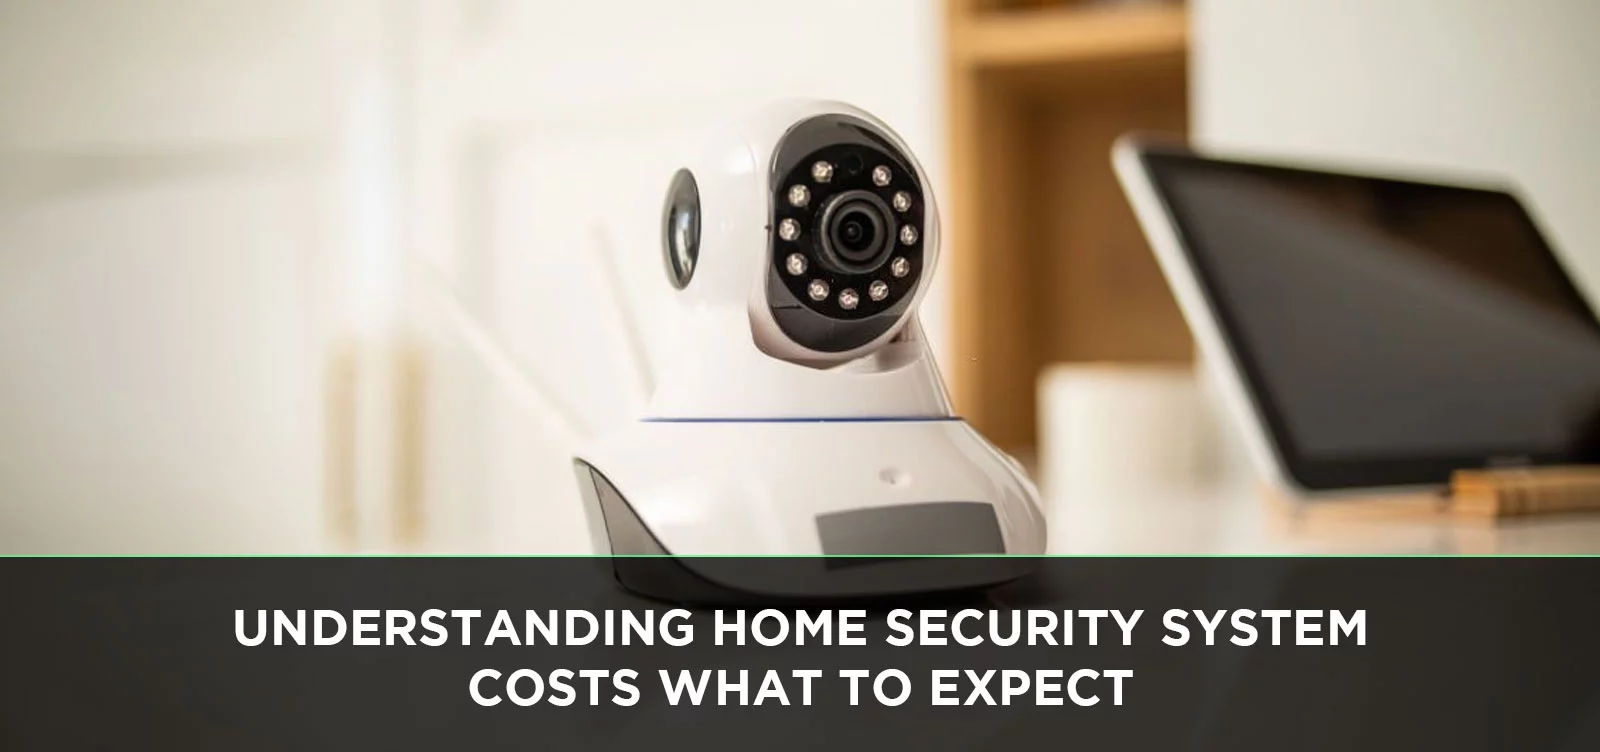 The Benefits of Home Surveillance Systems